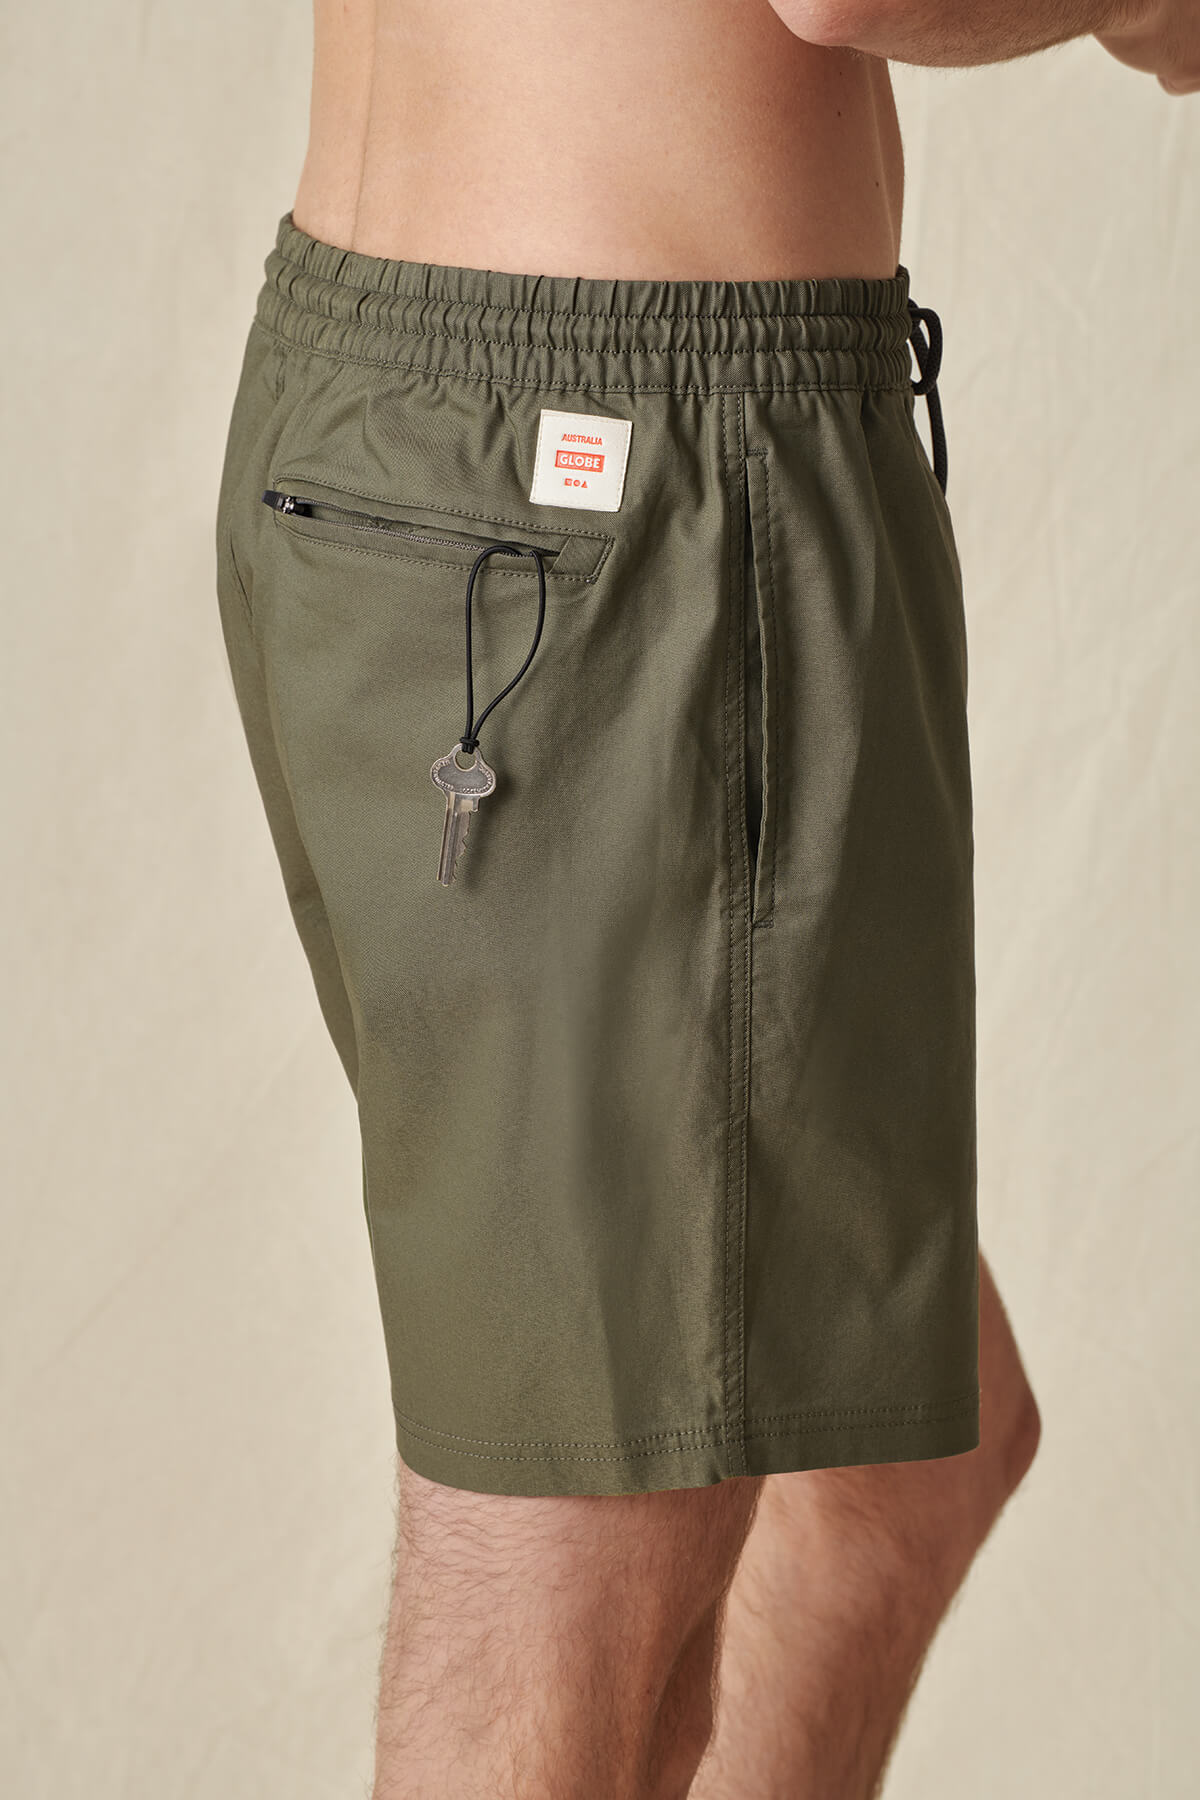 clean swell poolshort olive